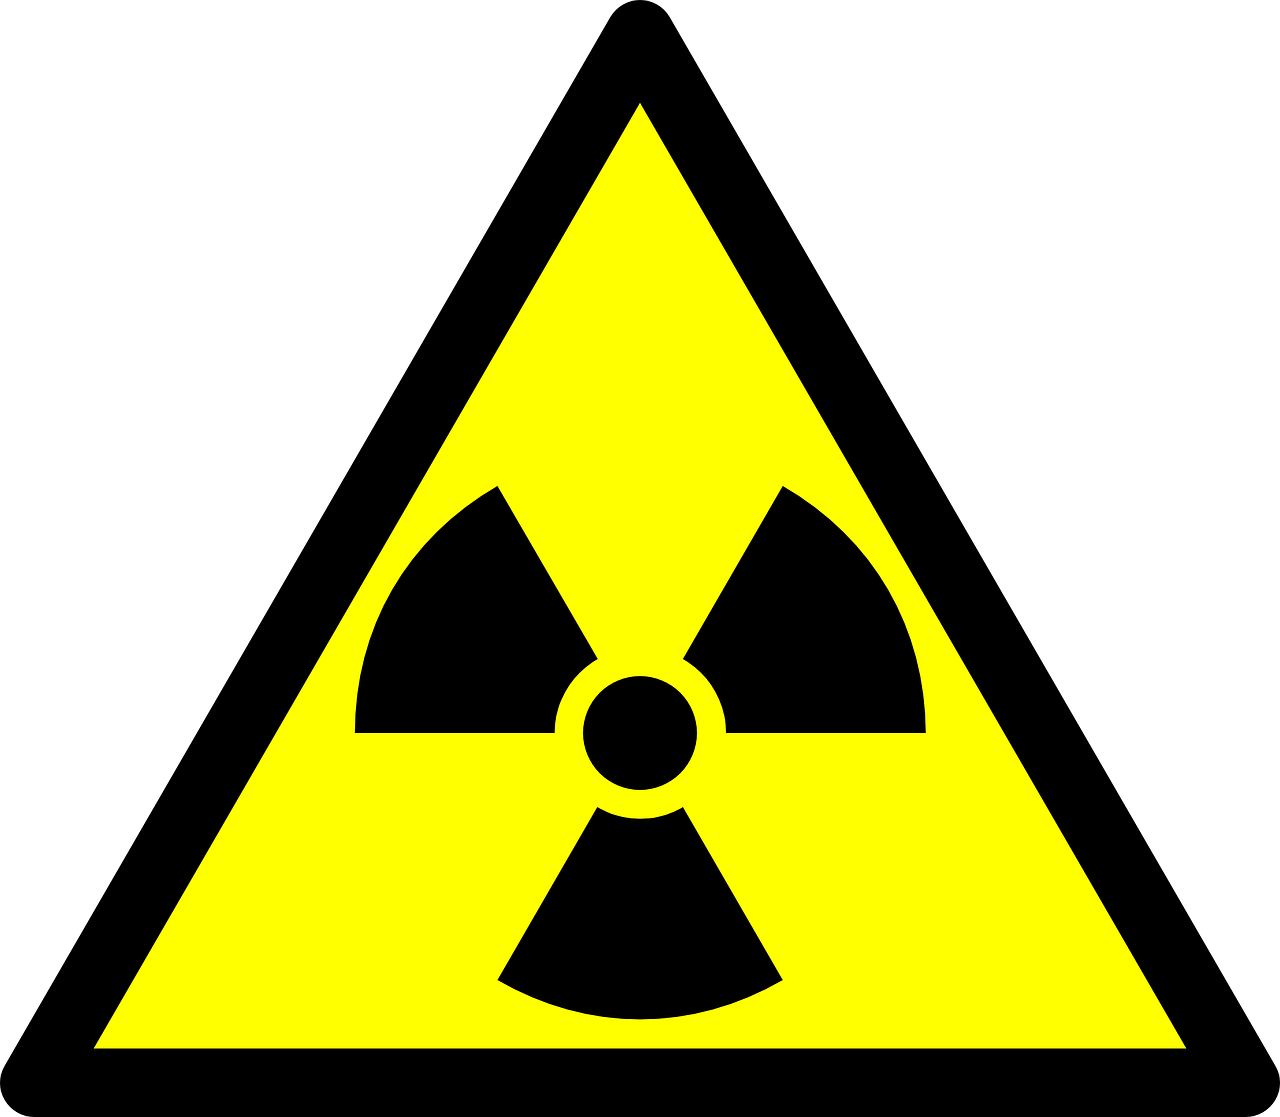 Technology risk illustration with nuclear risk picture from Pixabay by clkr free vector images